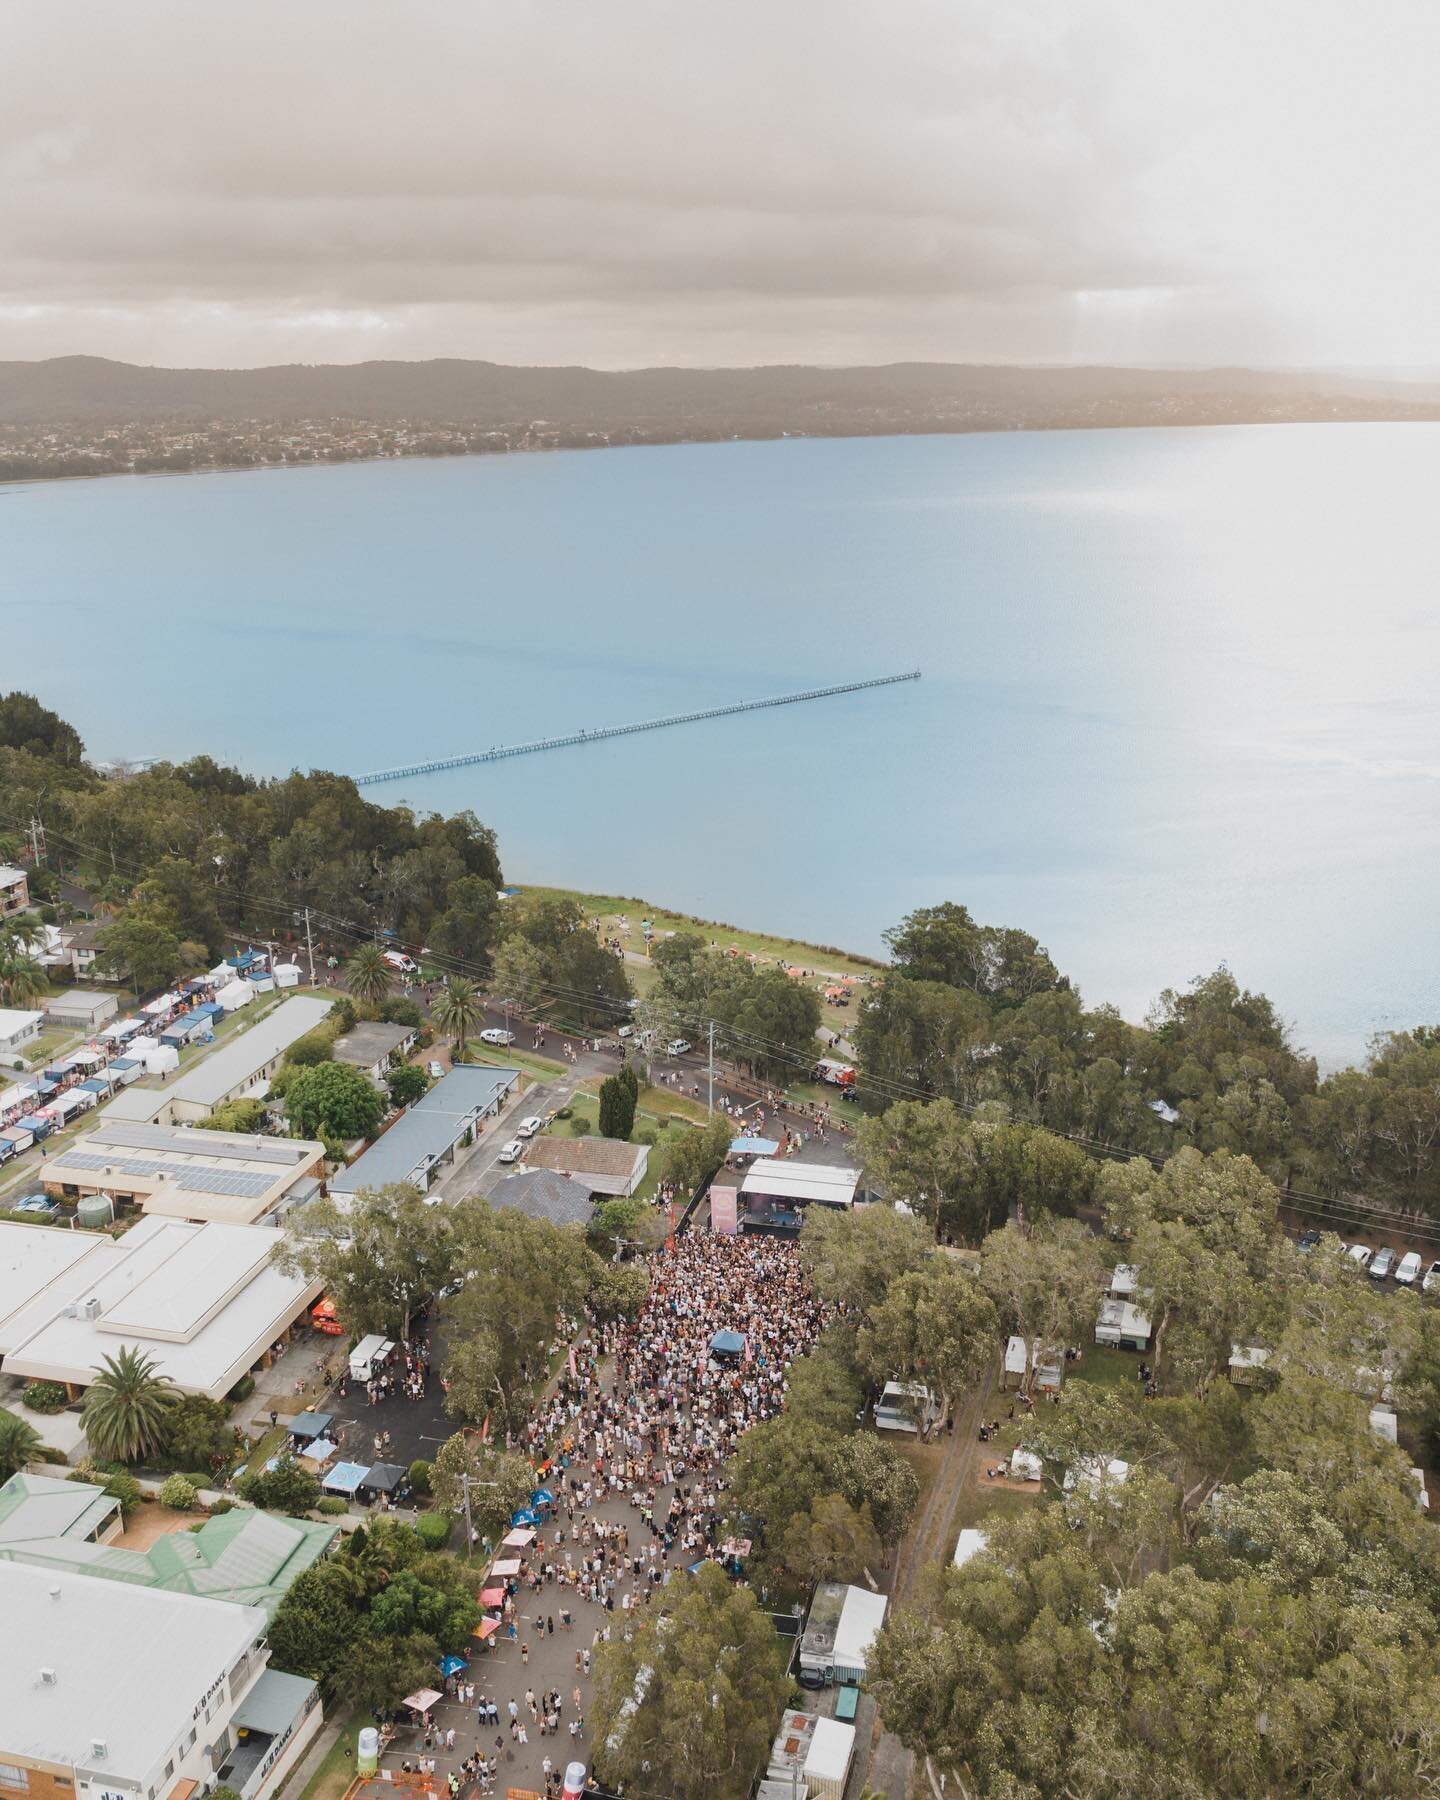 Long Jetty Festival was magic in all the ways!

It&rsquo;s been years in the making, months of early mornings/late nights, grant applications, vendor placements, stakeholder meetings and resident letters&hellip;.which is all worth it to feel the vibe